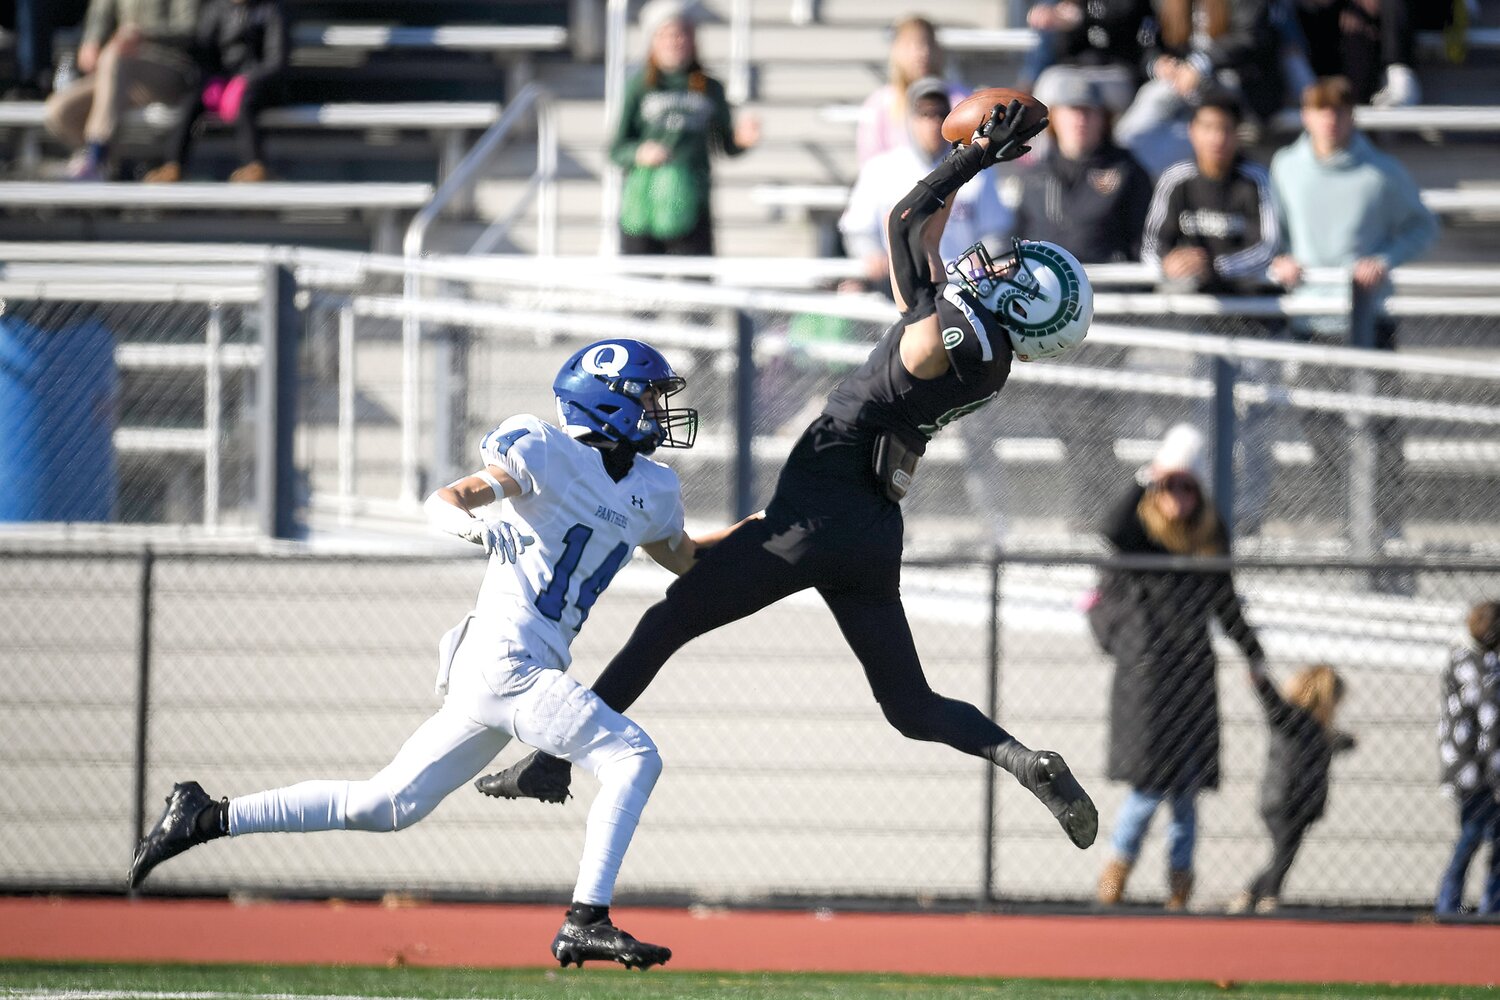 Pennridge receiver Joe Gregorie makes an acrobatic catch during a late fourth quarter drive in front of Quarkertown’s Reagan Payne.